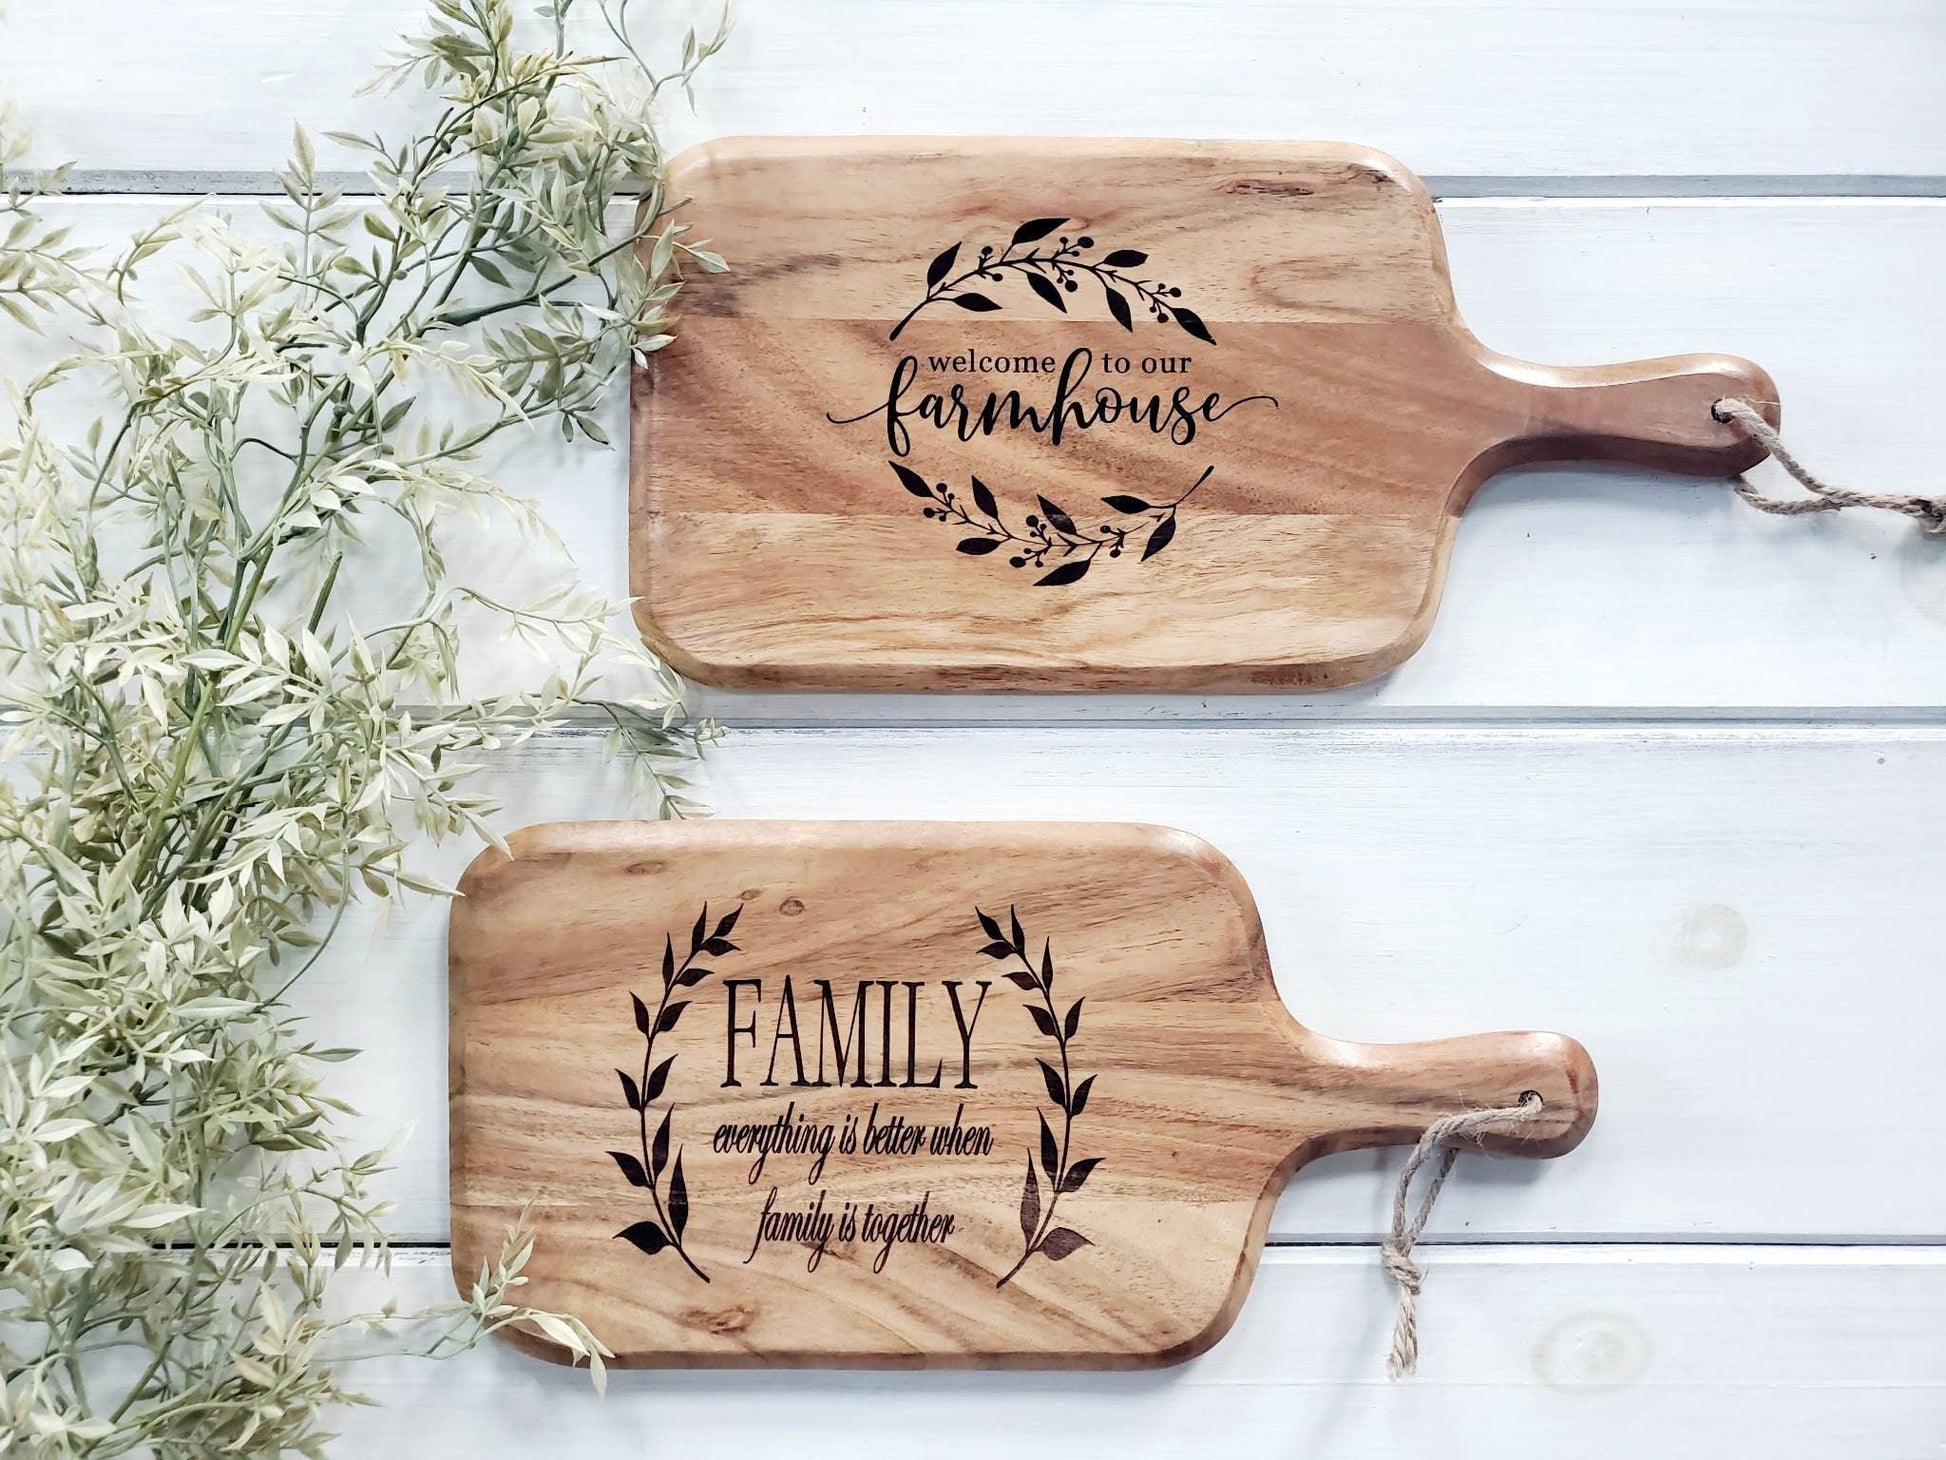 Bamboo Cutting Board Decor the Secret Ingredient is Always Love